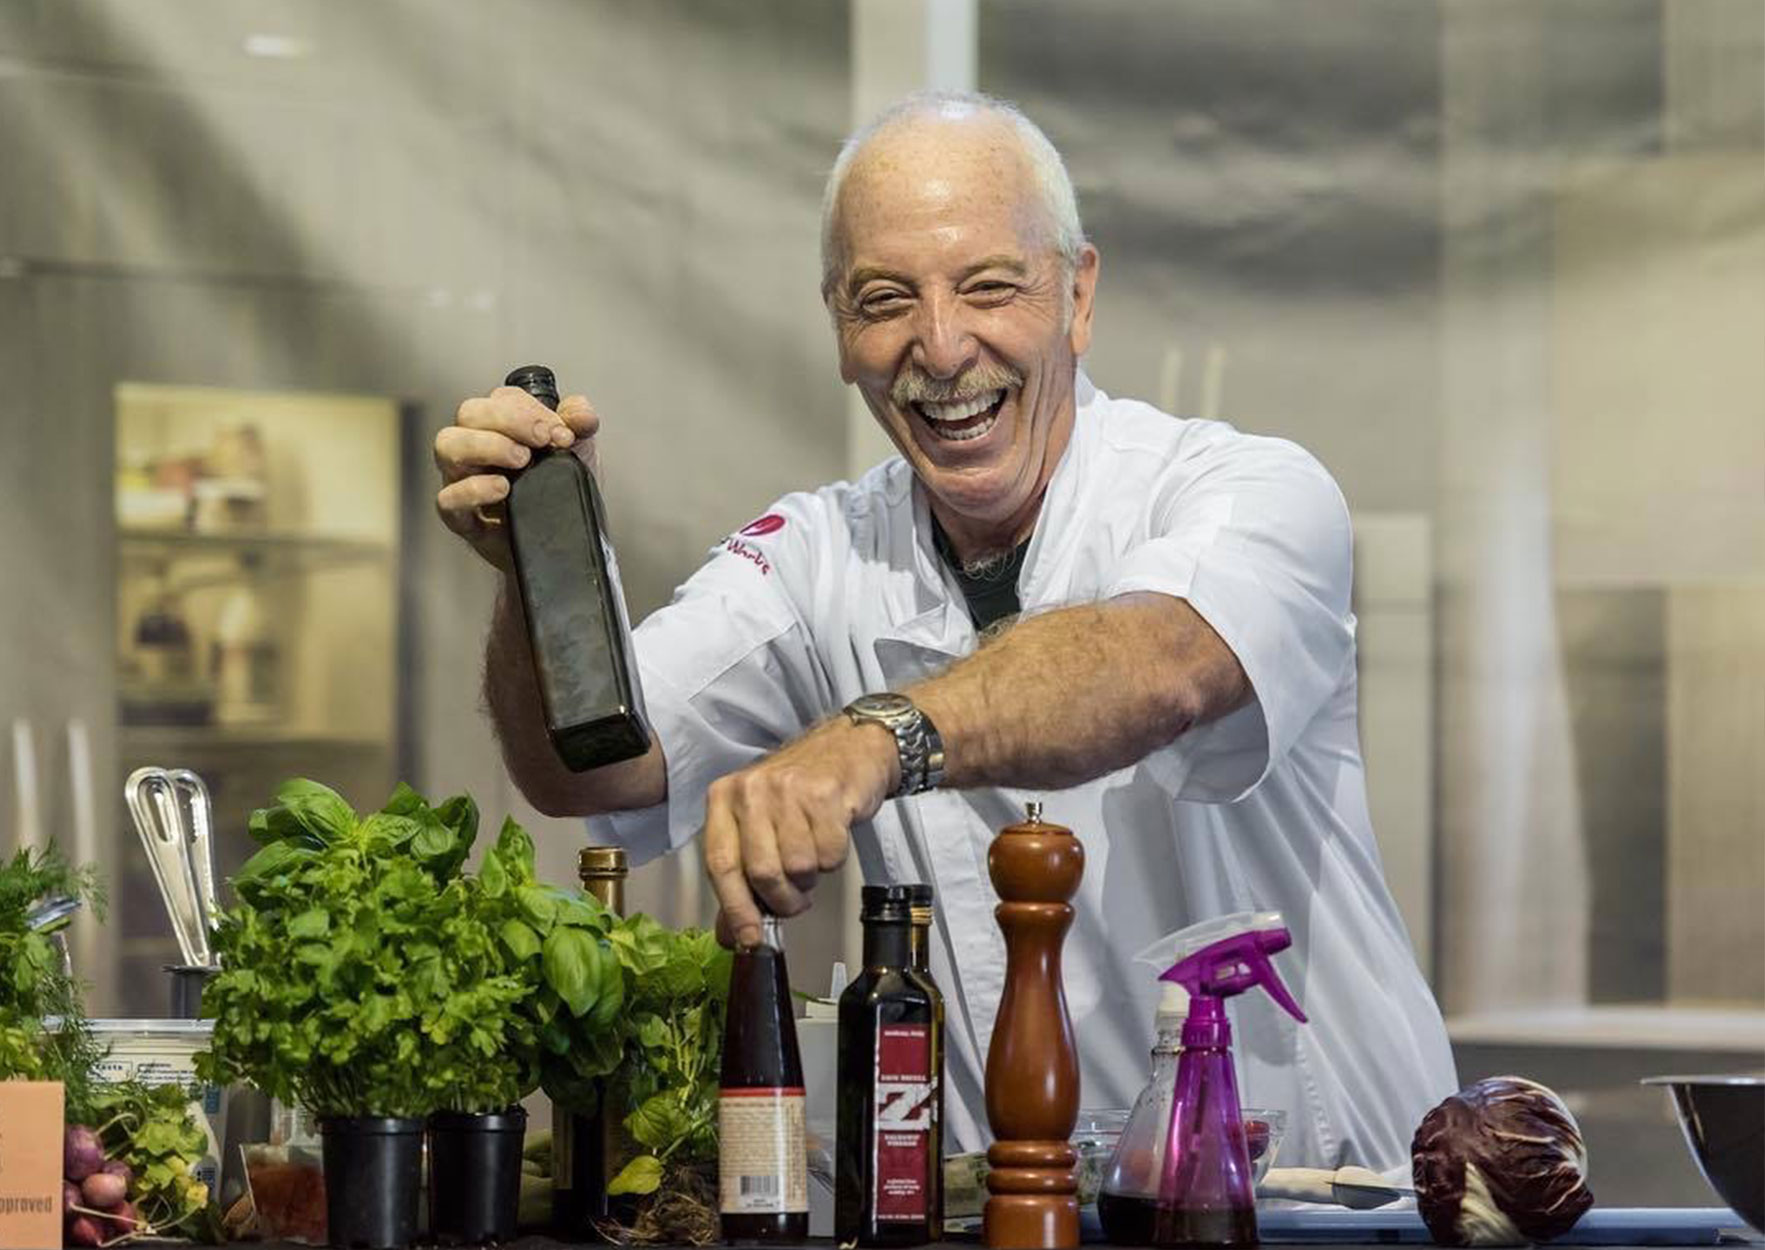 Zack Bruell posing for glamour photographs with olive oil in his kitchen.